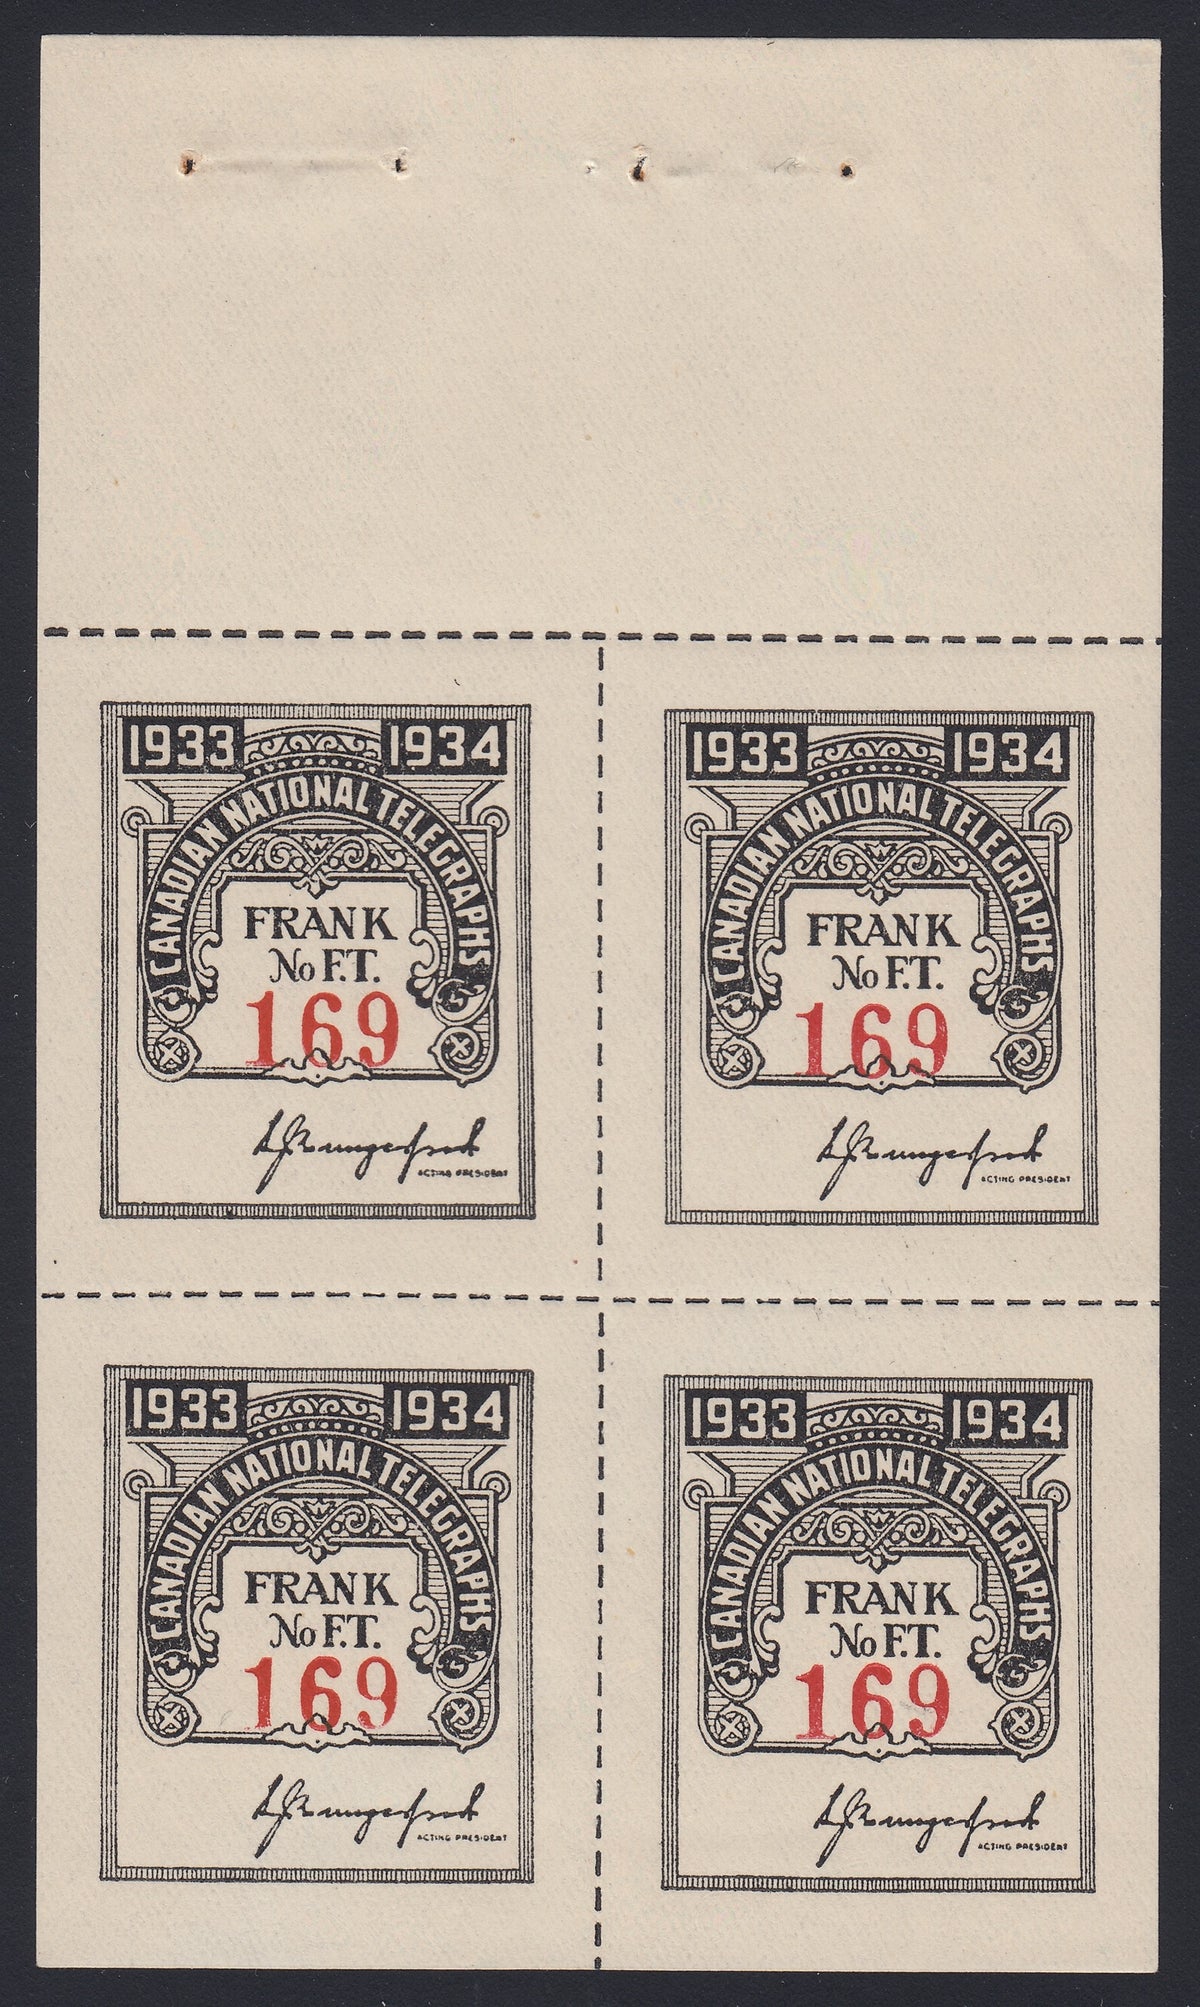 0113CN1712 - TCN9 - Mint Booklet Pane of 4